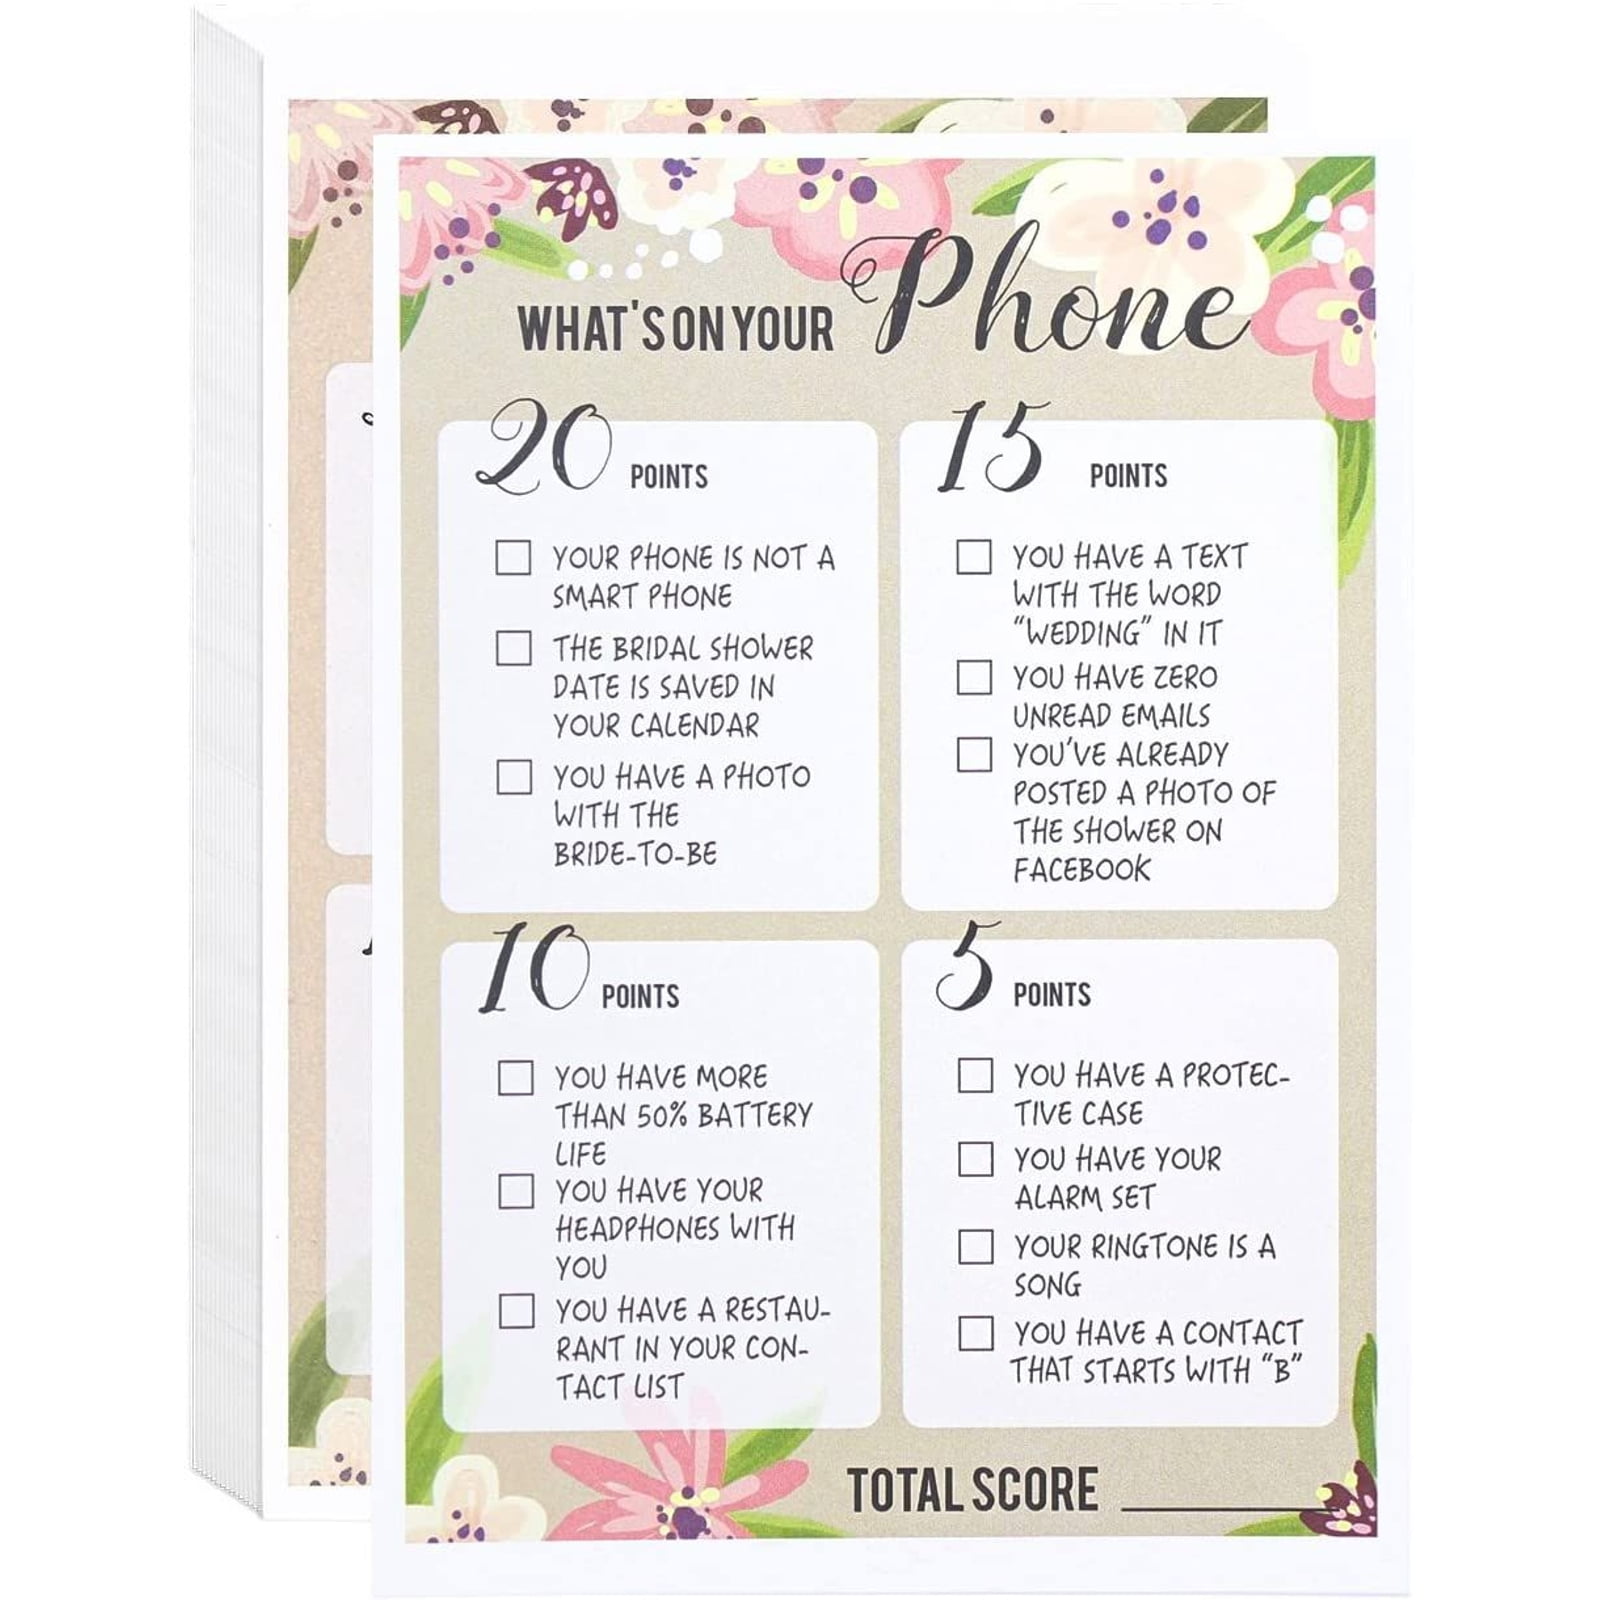 Burgundy and Blush Memories with the Bride Cards Game Share a Memory Game Floral Bridal Shower Game Cards and Sign Instant Download W2